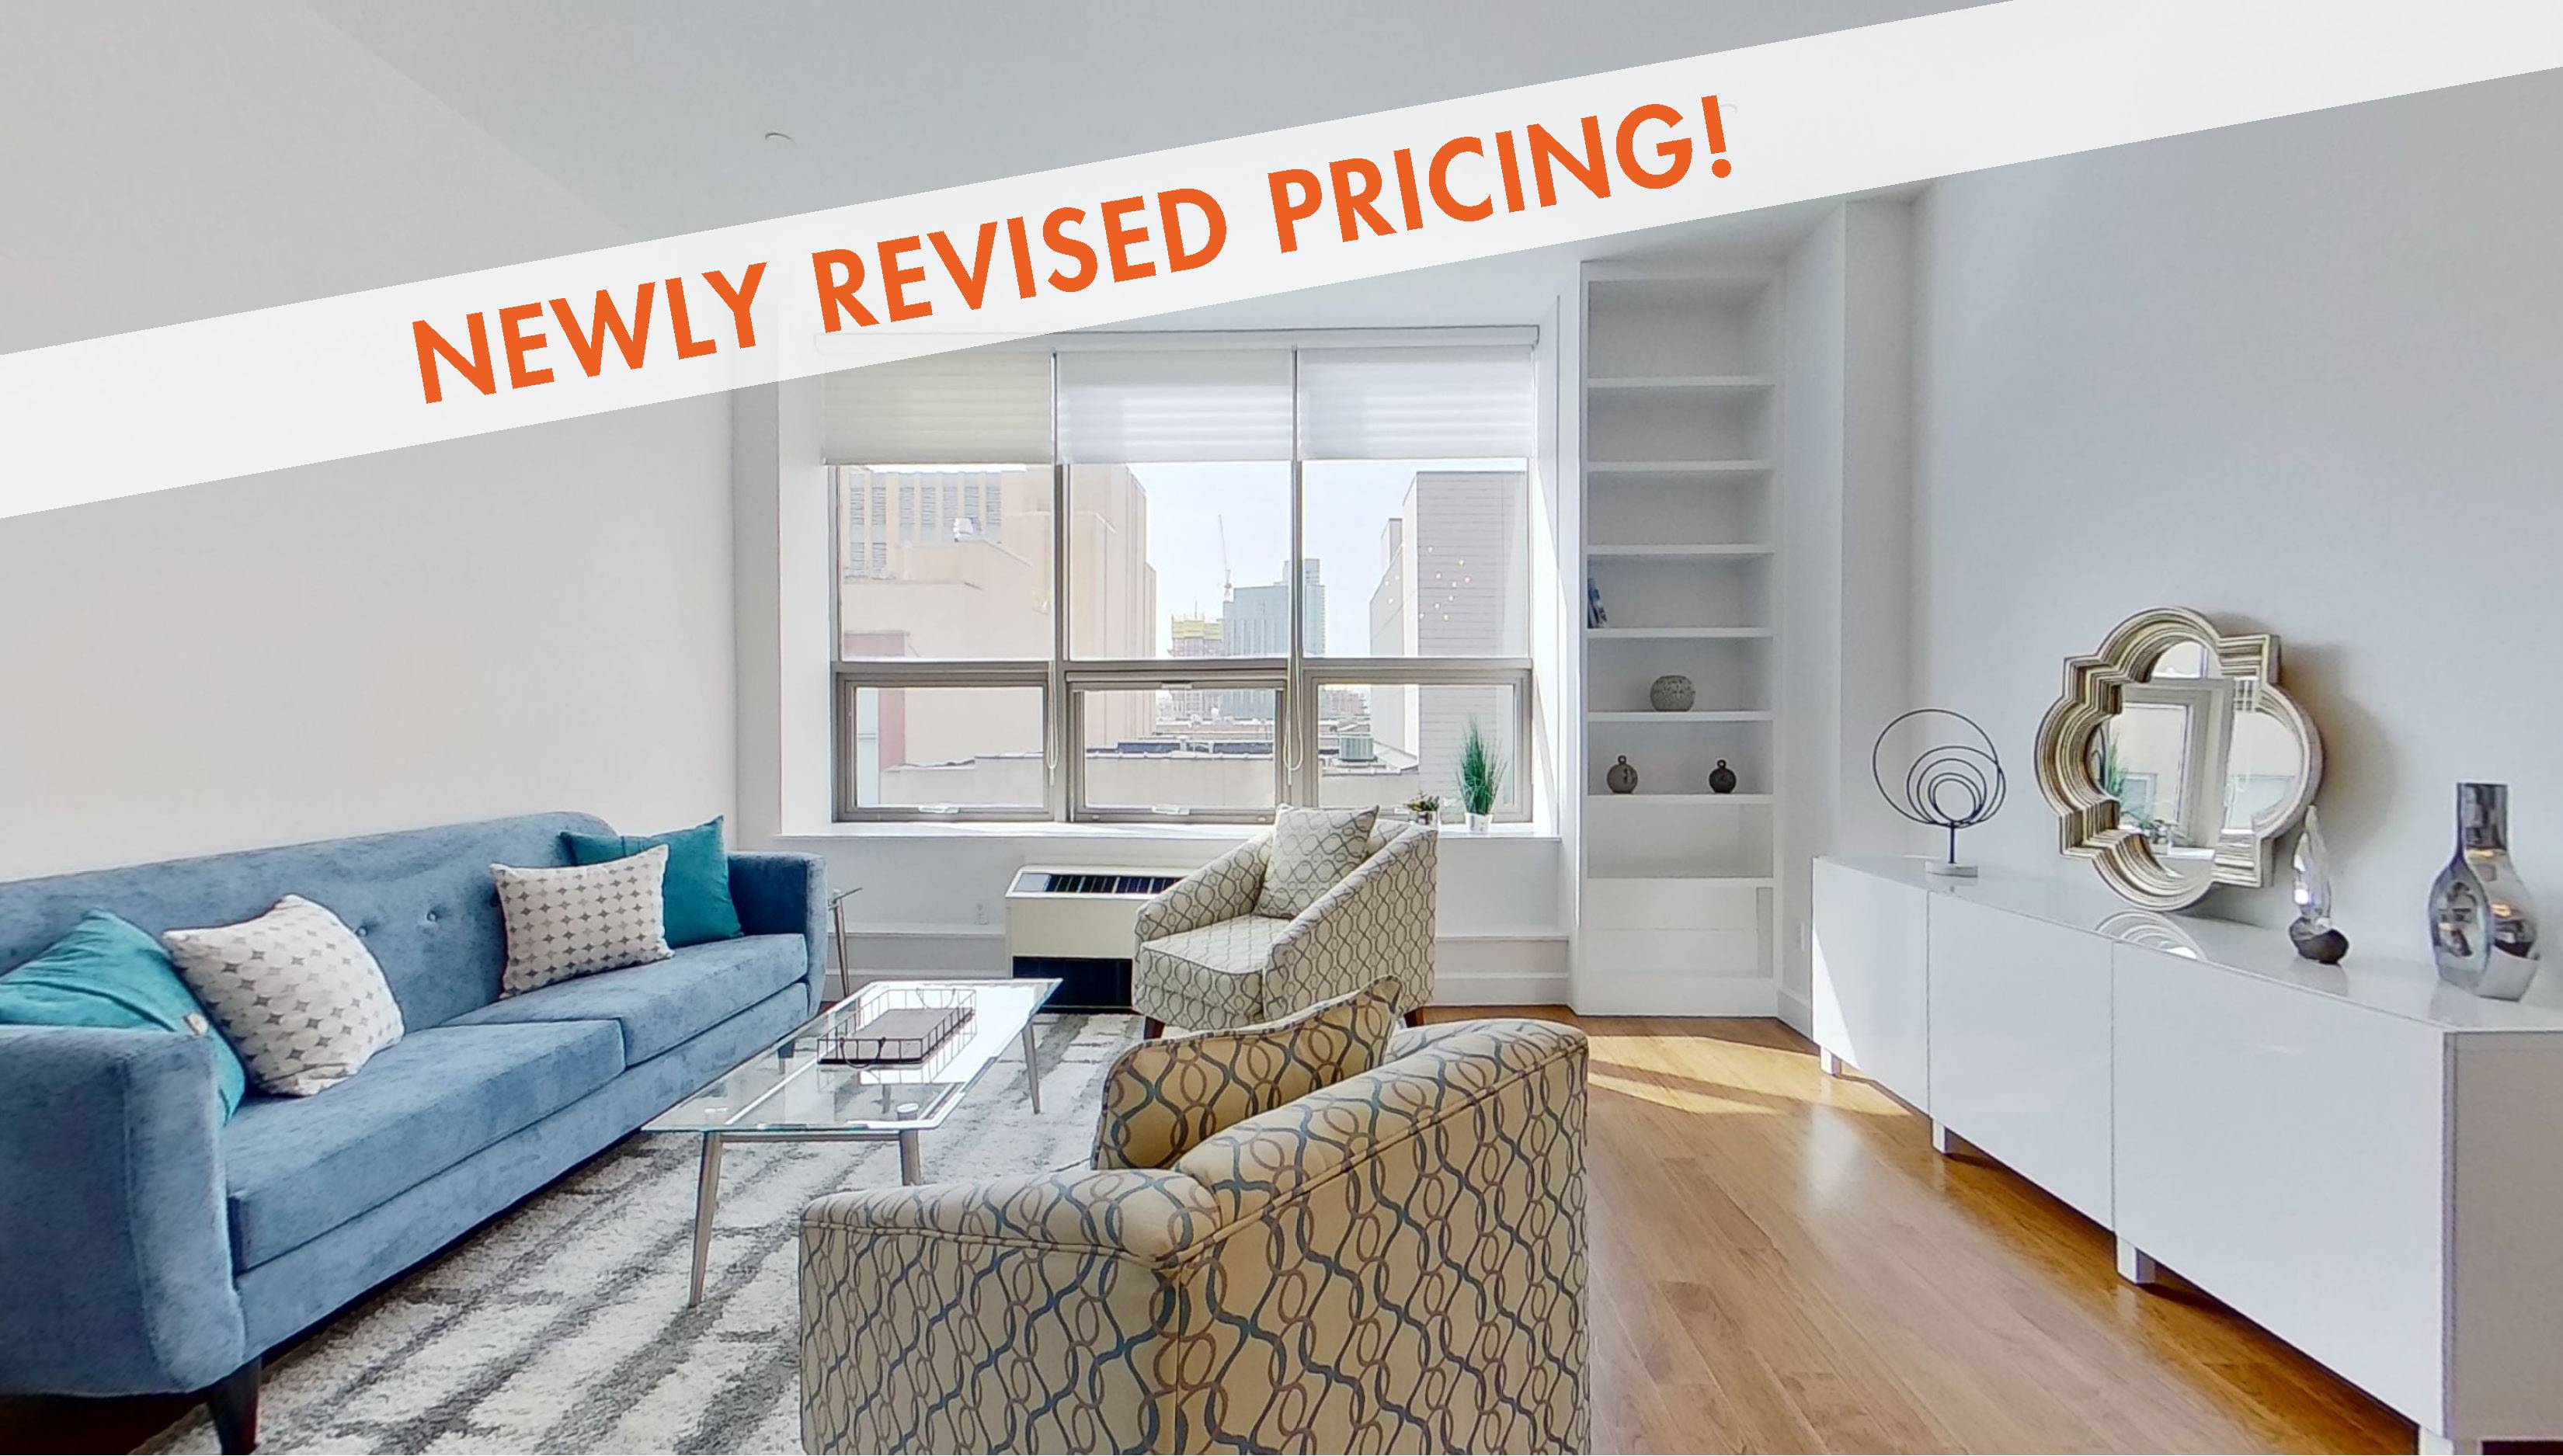 NEWLY REVISED PRICING of over 50K Reduction !